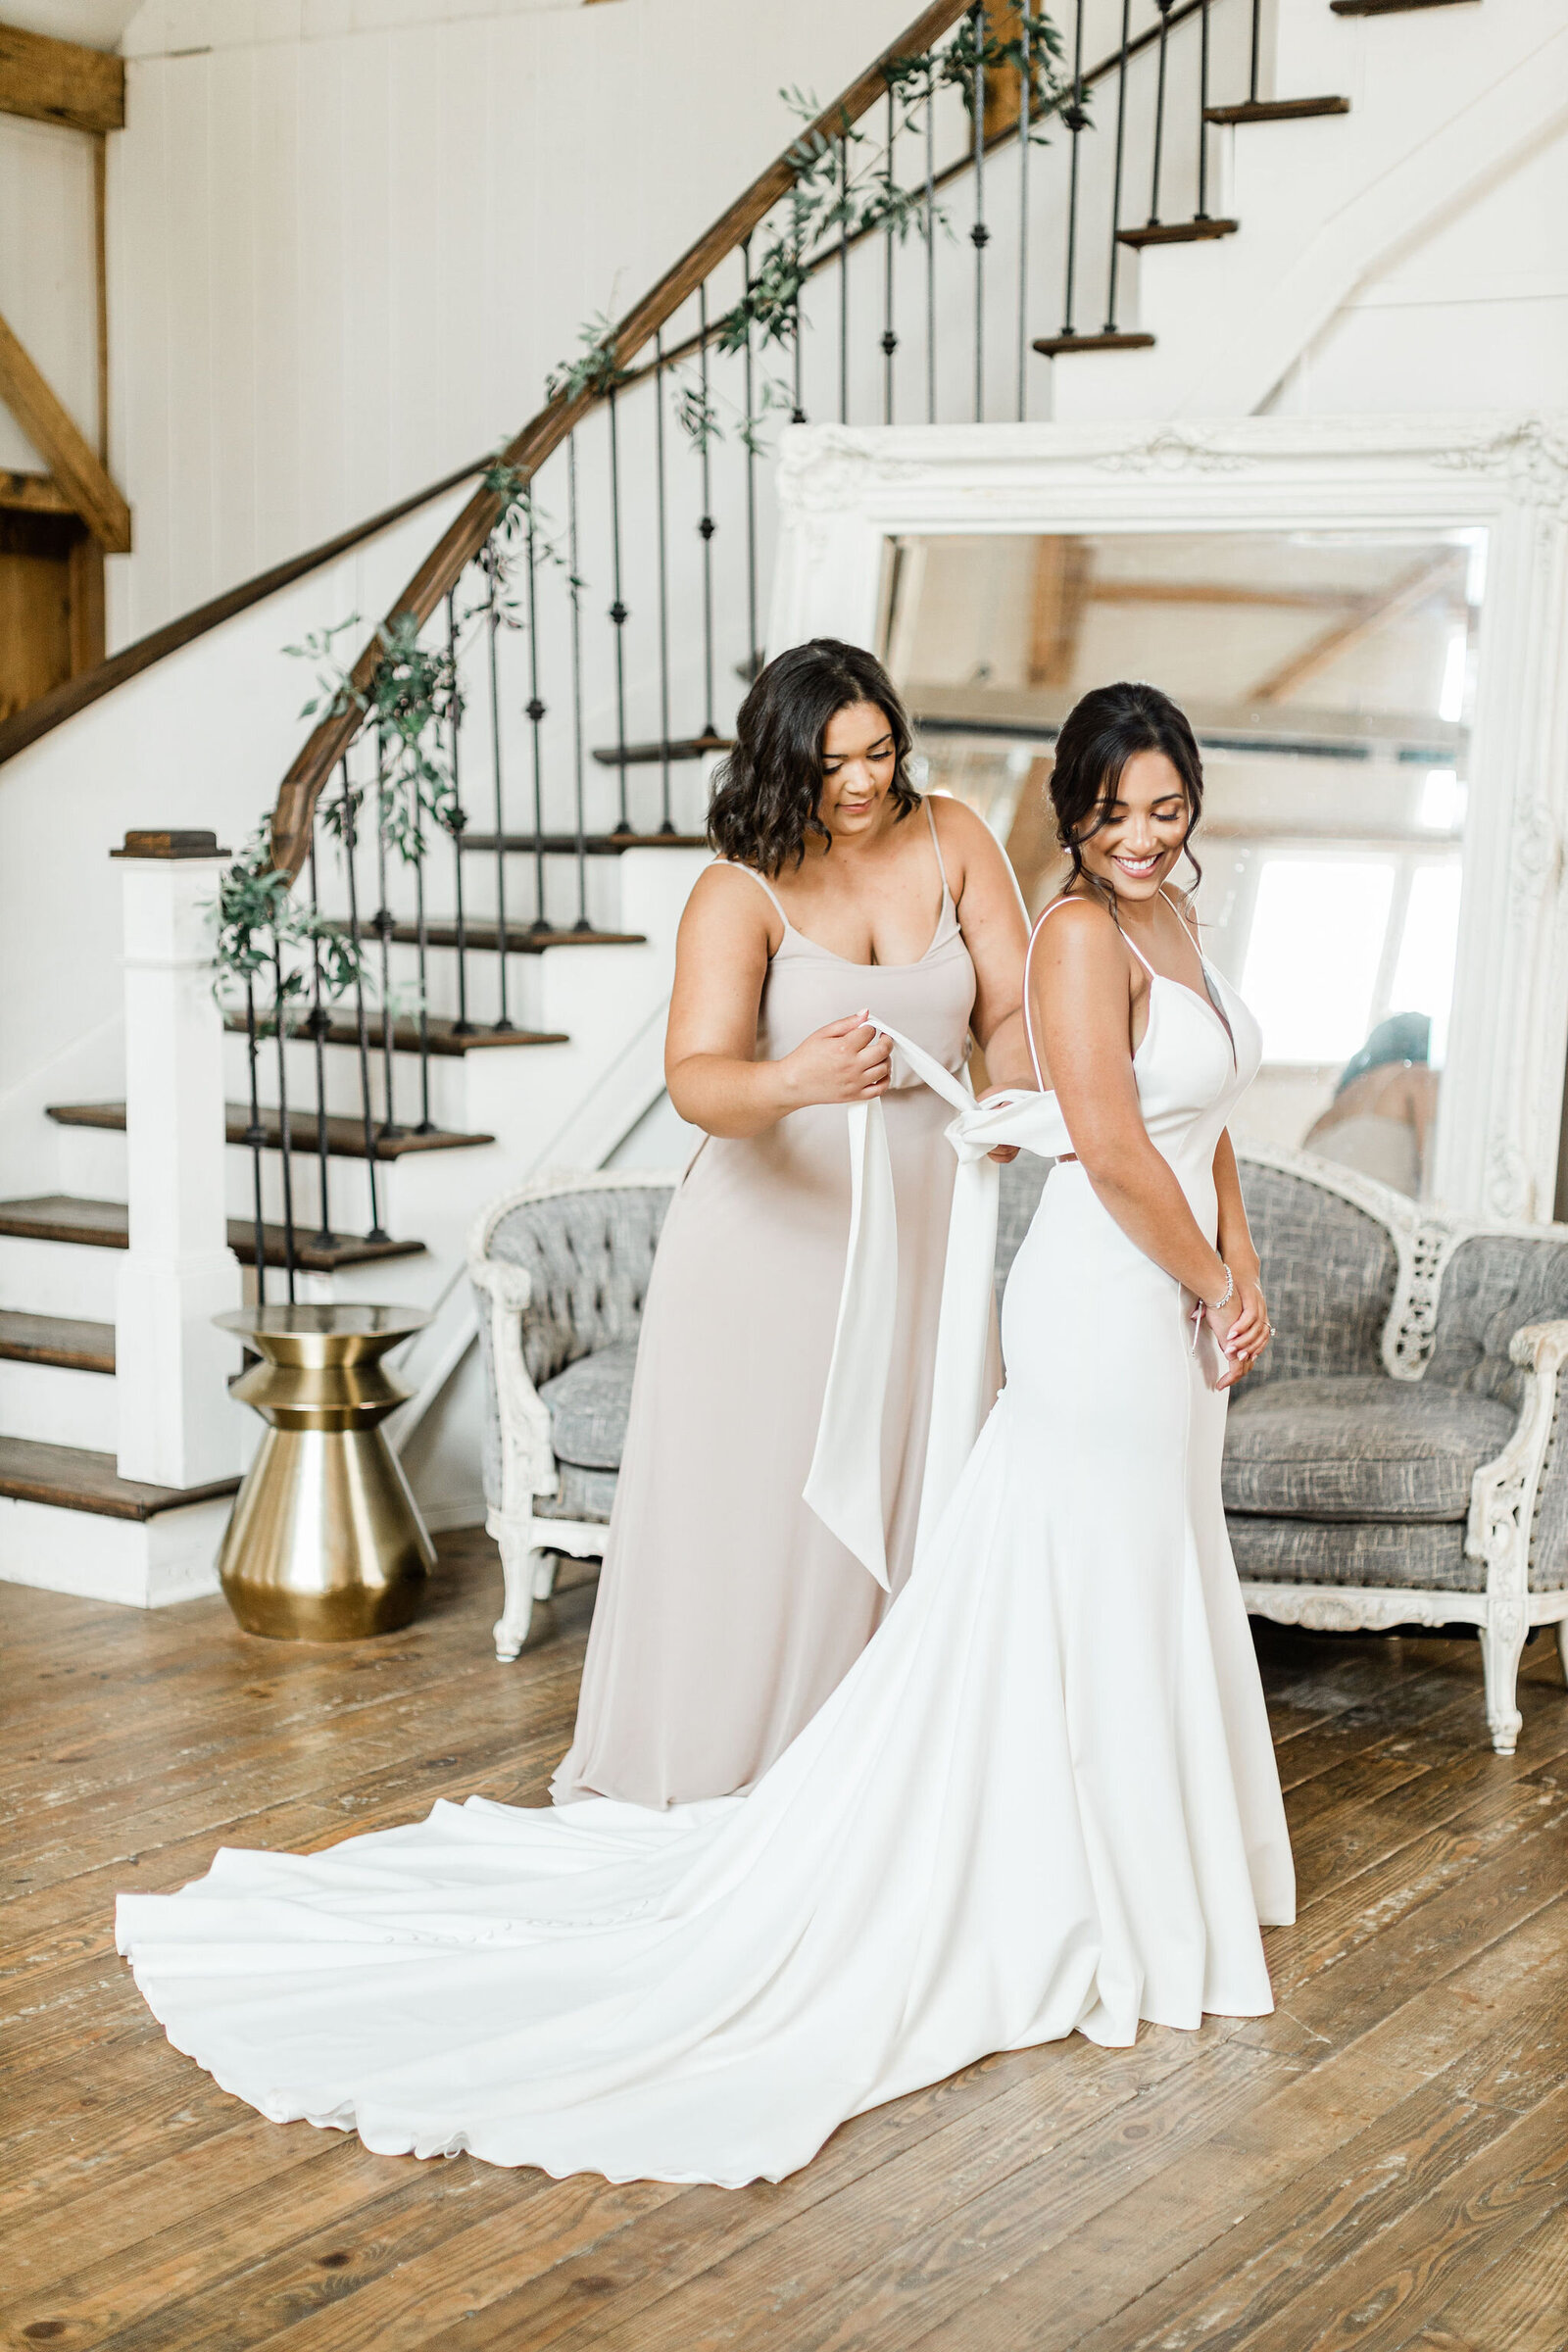 Bride Getting Dressed | Cleveland OH | The Axtells Photo and Film